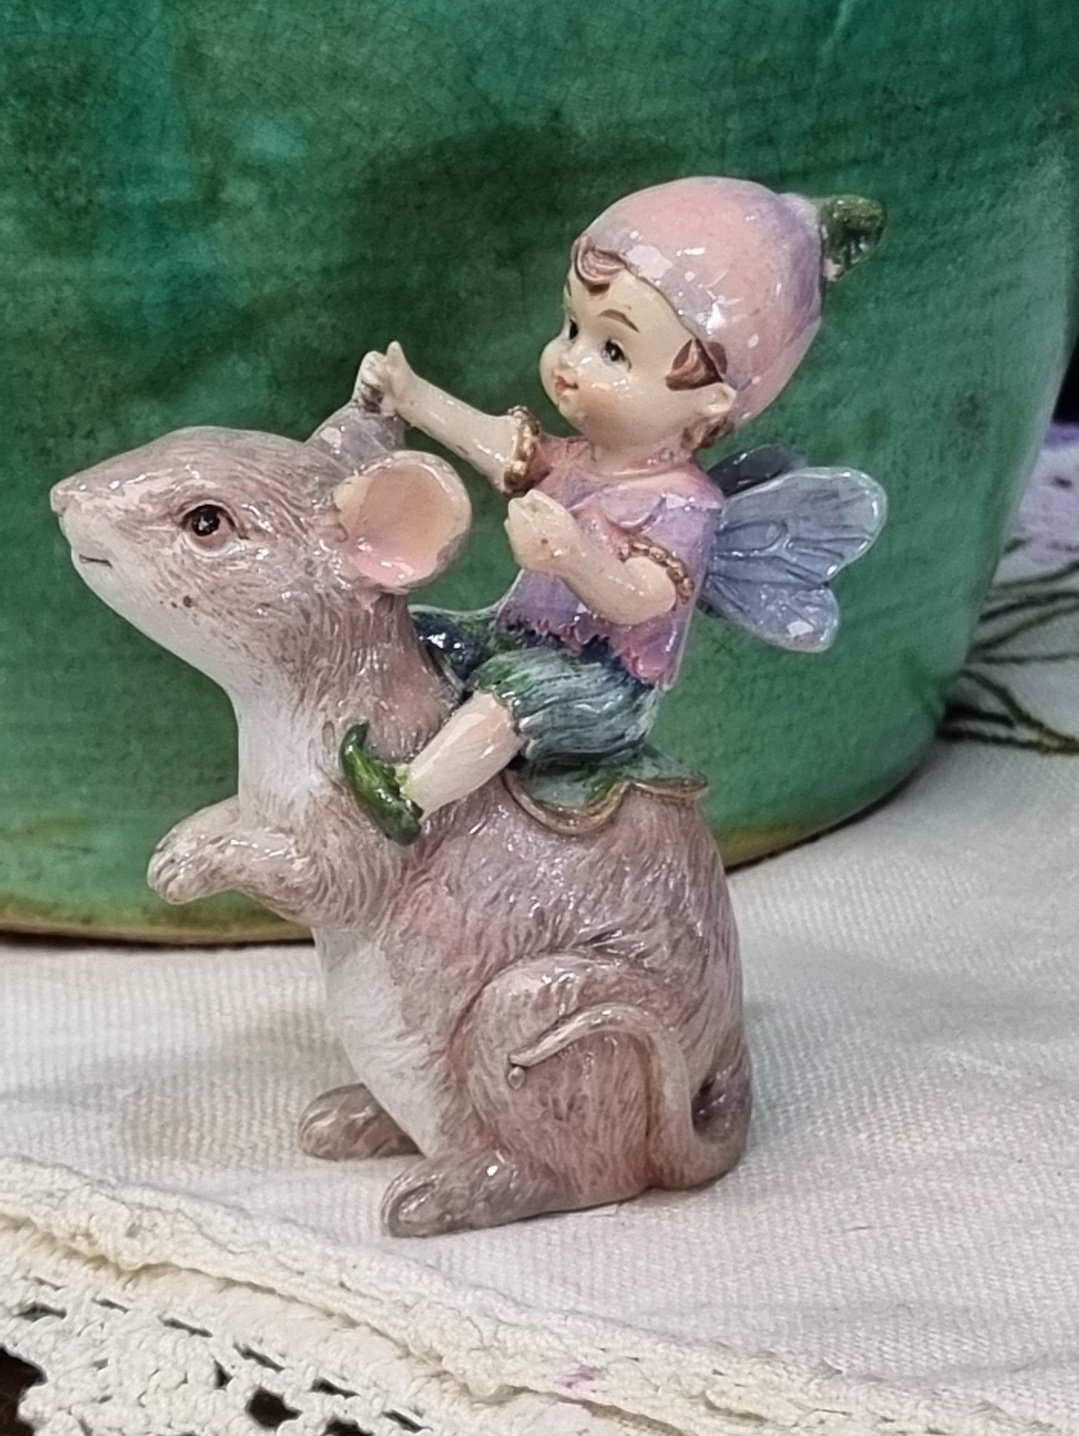 Image of Flower Fairy riding a Mouse figurine